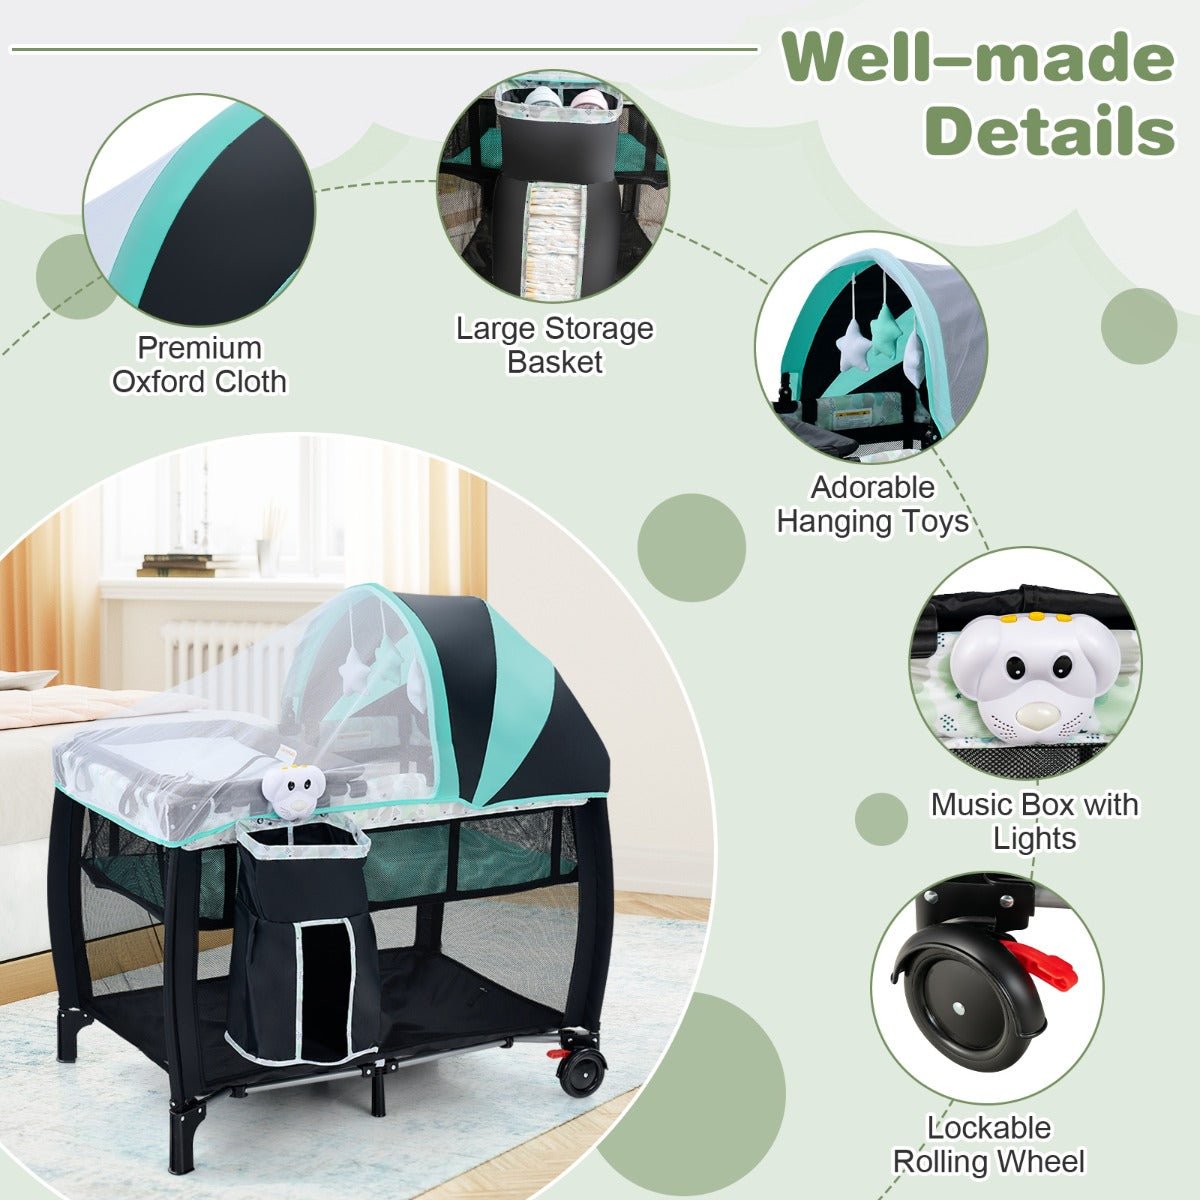 Convertible Baby Portacot - 3-in-1 Design with Adjustable Net for Safety